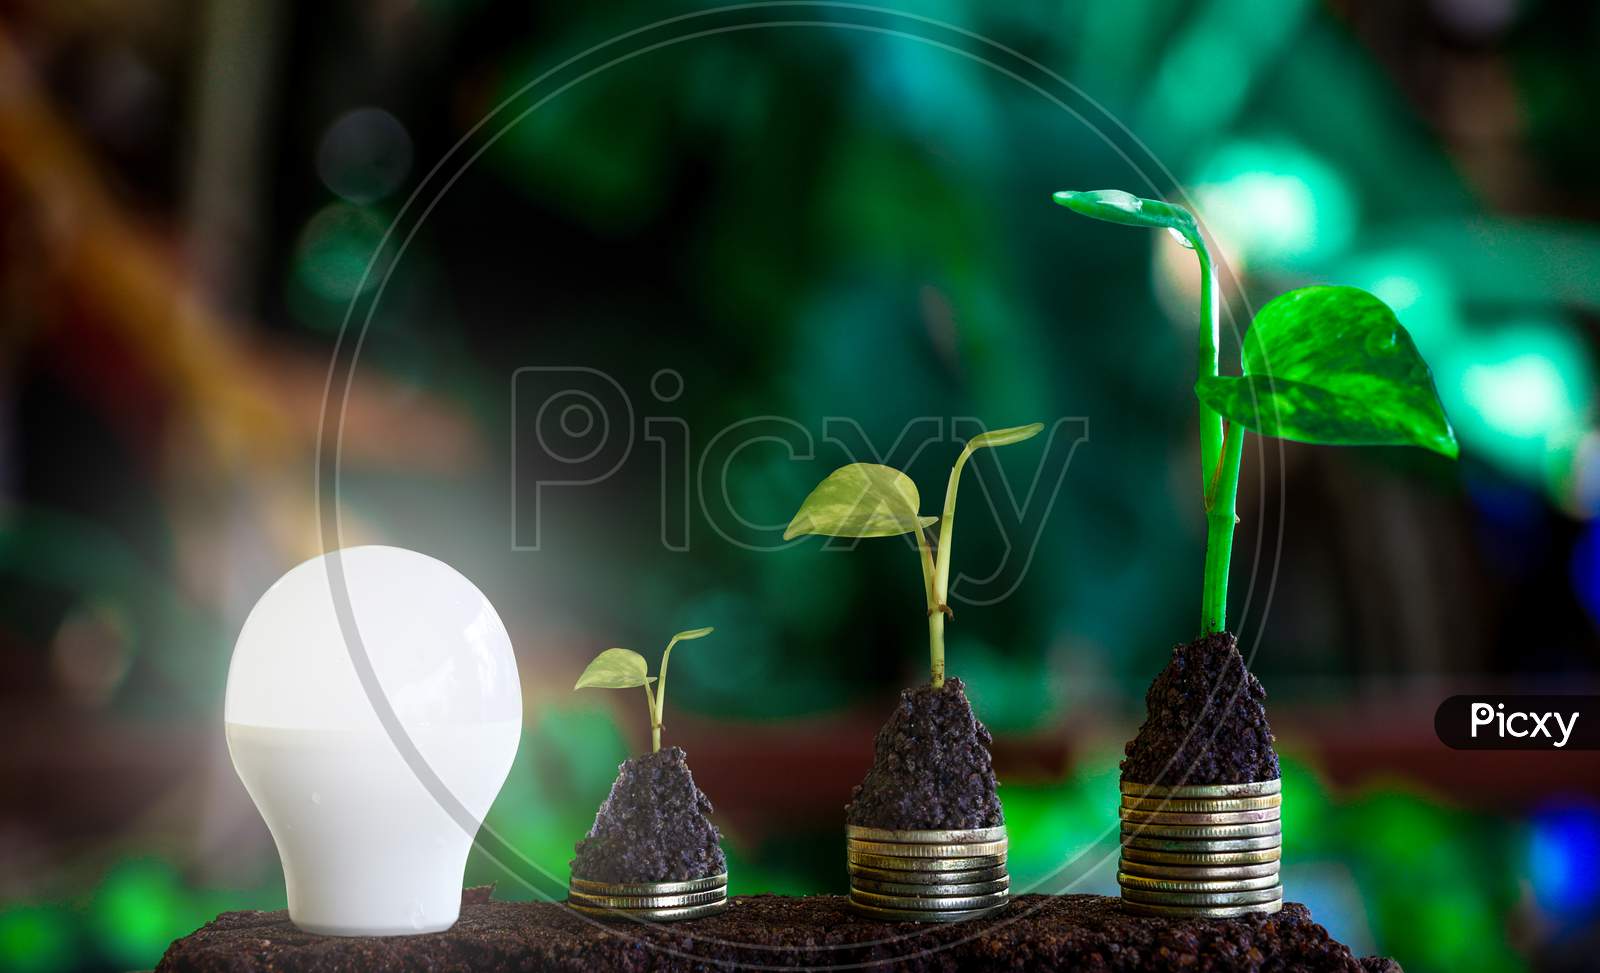 Alternative Energy, Renewable Energy, Saving Energy And Finance, Energy Stock Investment, Tree Growing Up On Coin And Lightbulb On Soil.